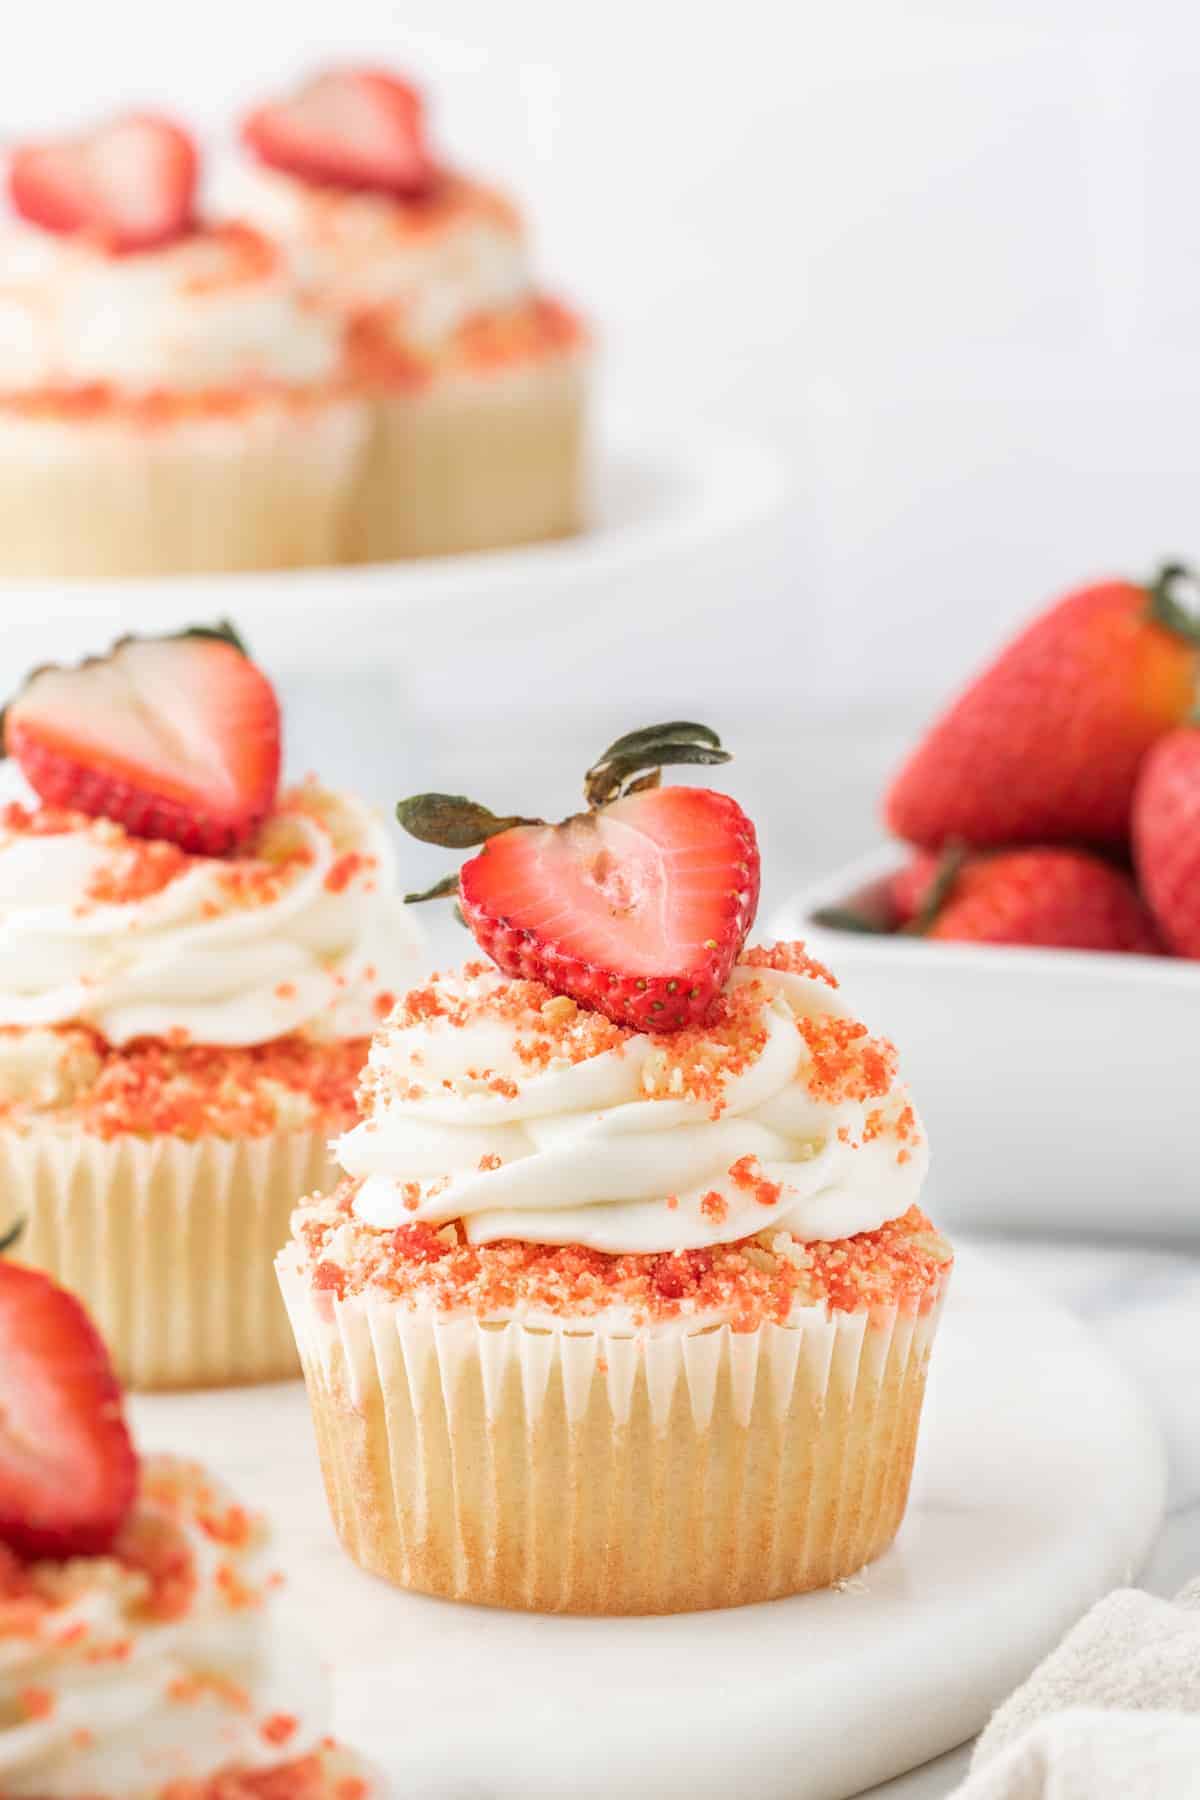 Strawberry crunch cupcakes with white frosting and a sliced strawberry on top.